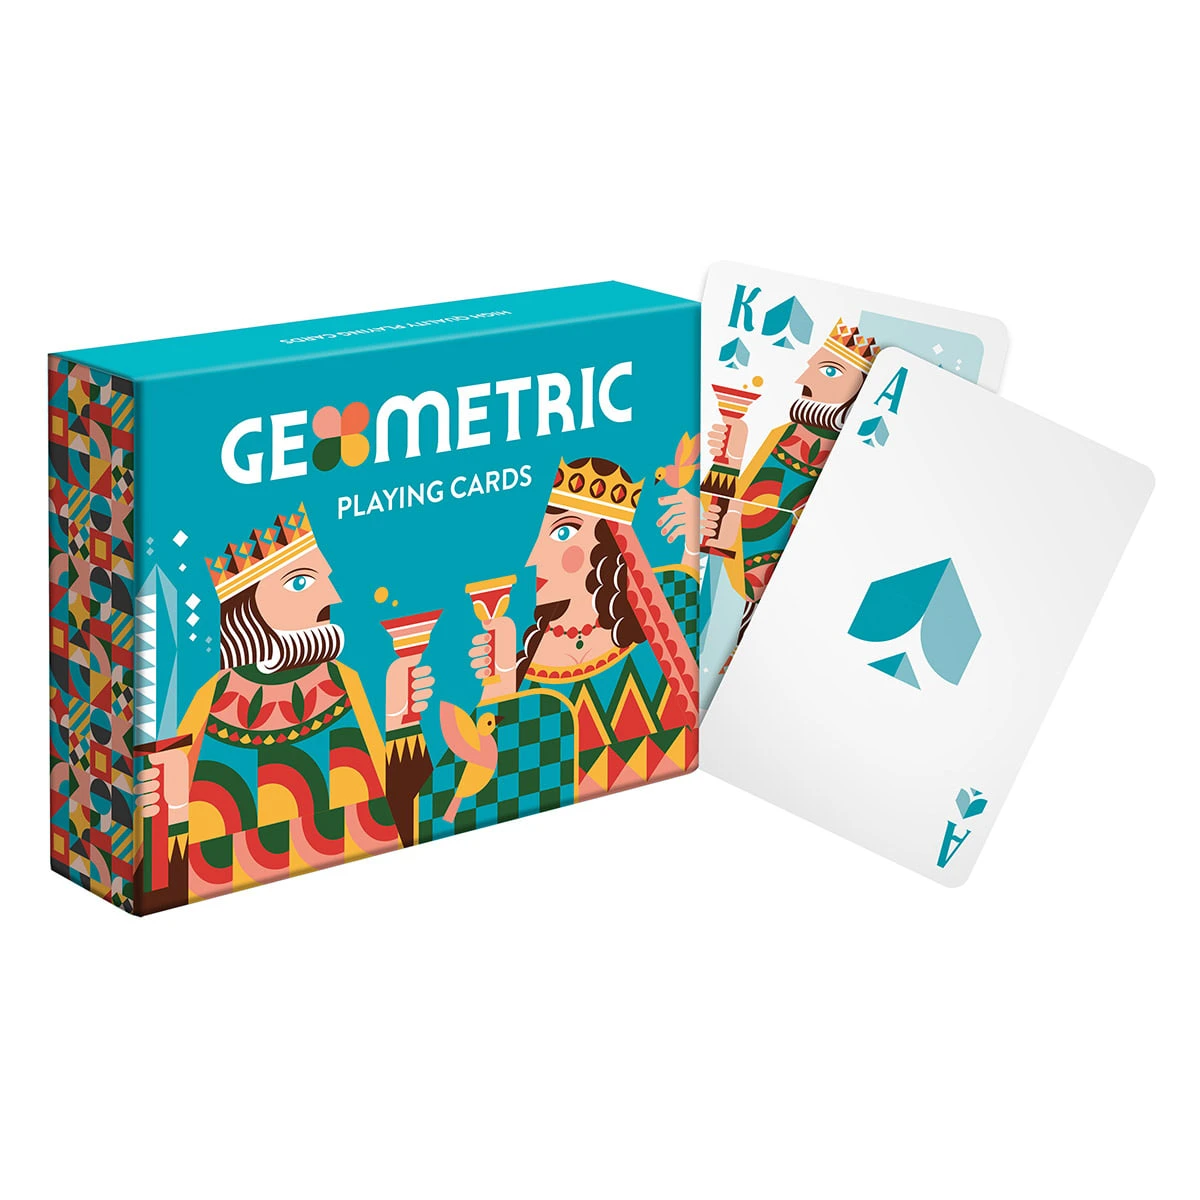 Geometric Double Playing Cards Set